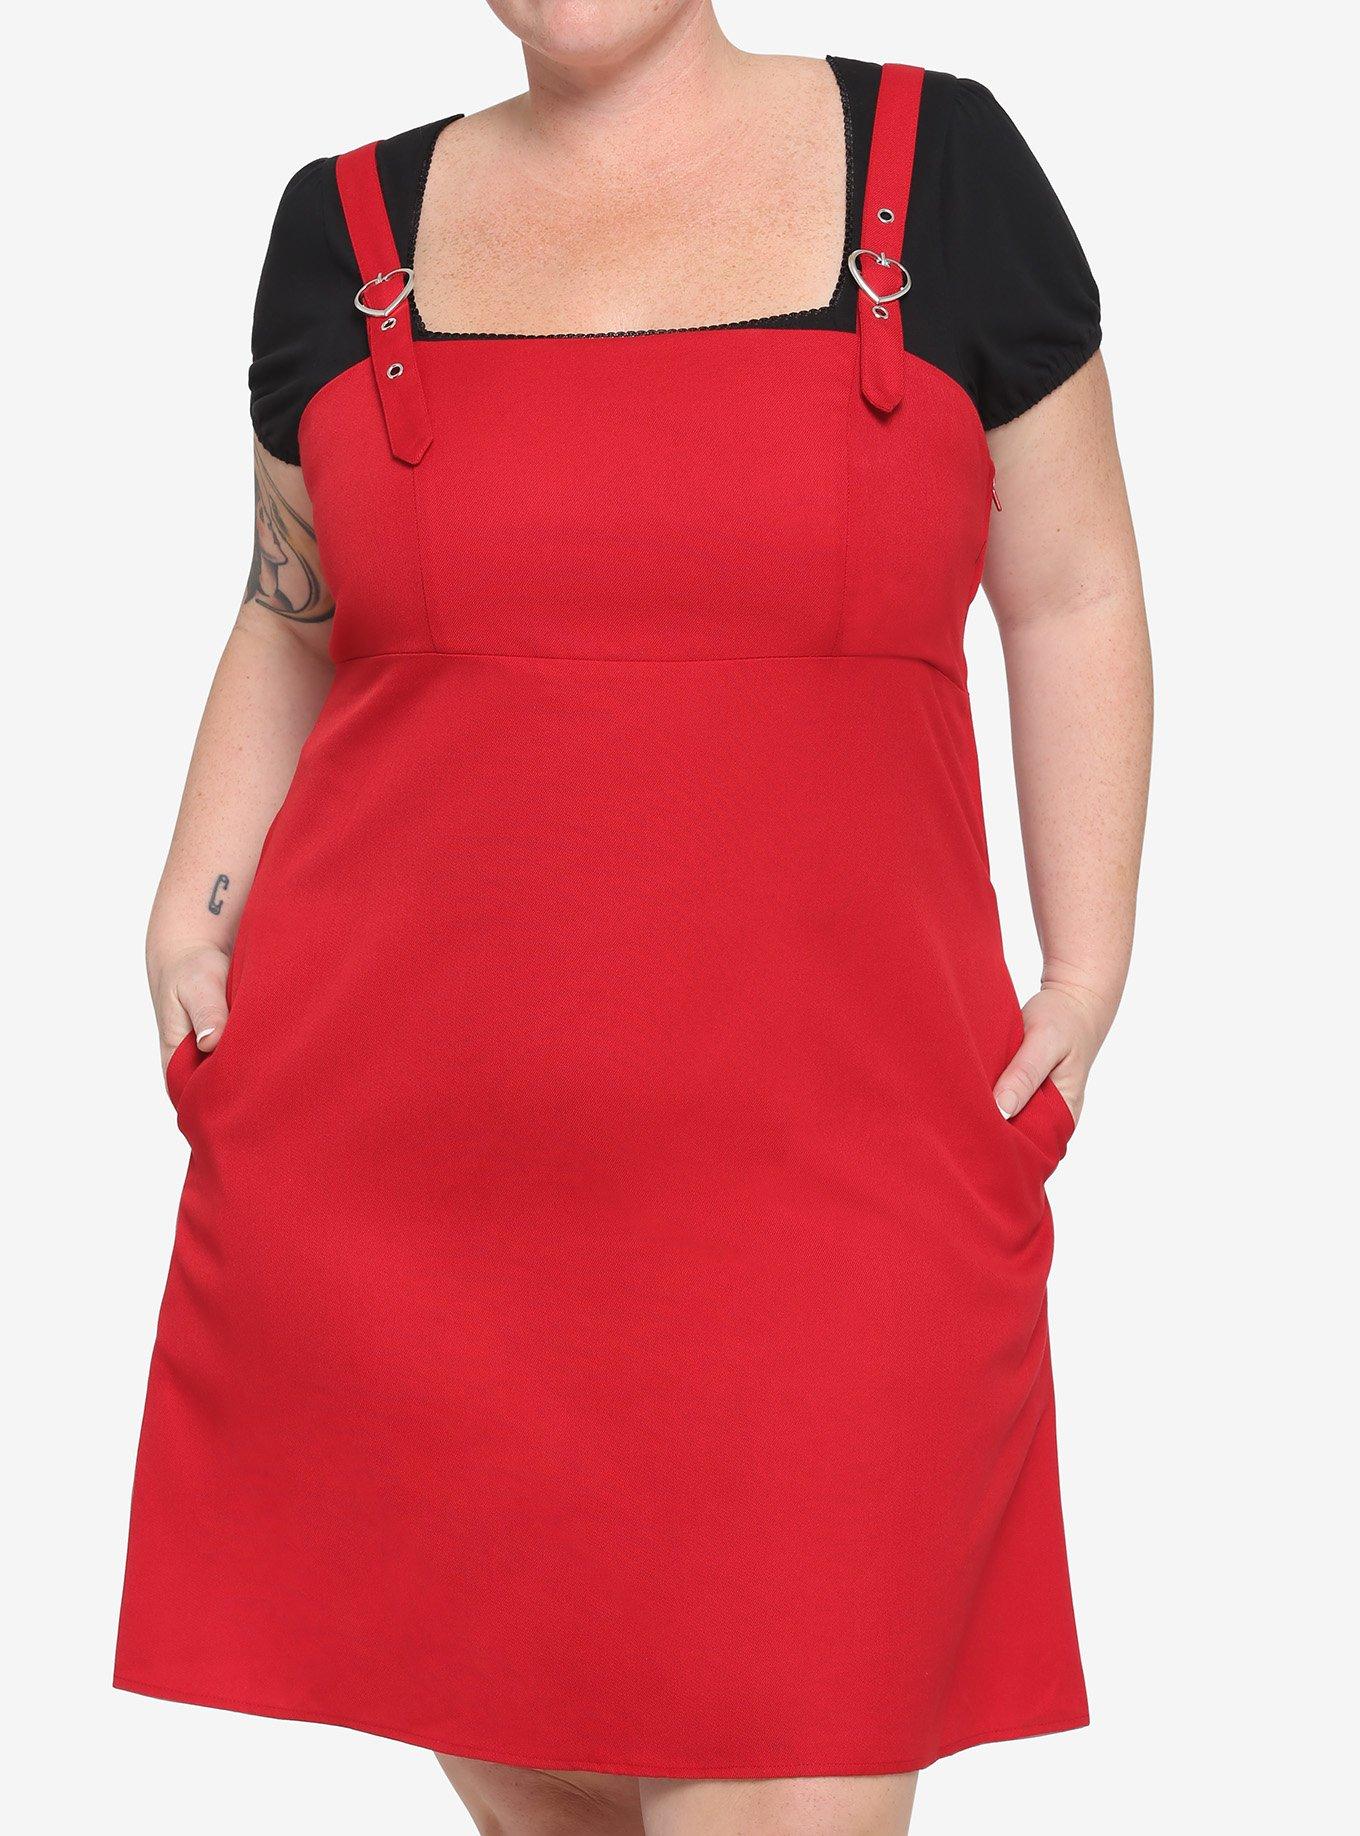 Red Heart Buckle Pinafore Dress Plus Size, RED, hi-res